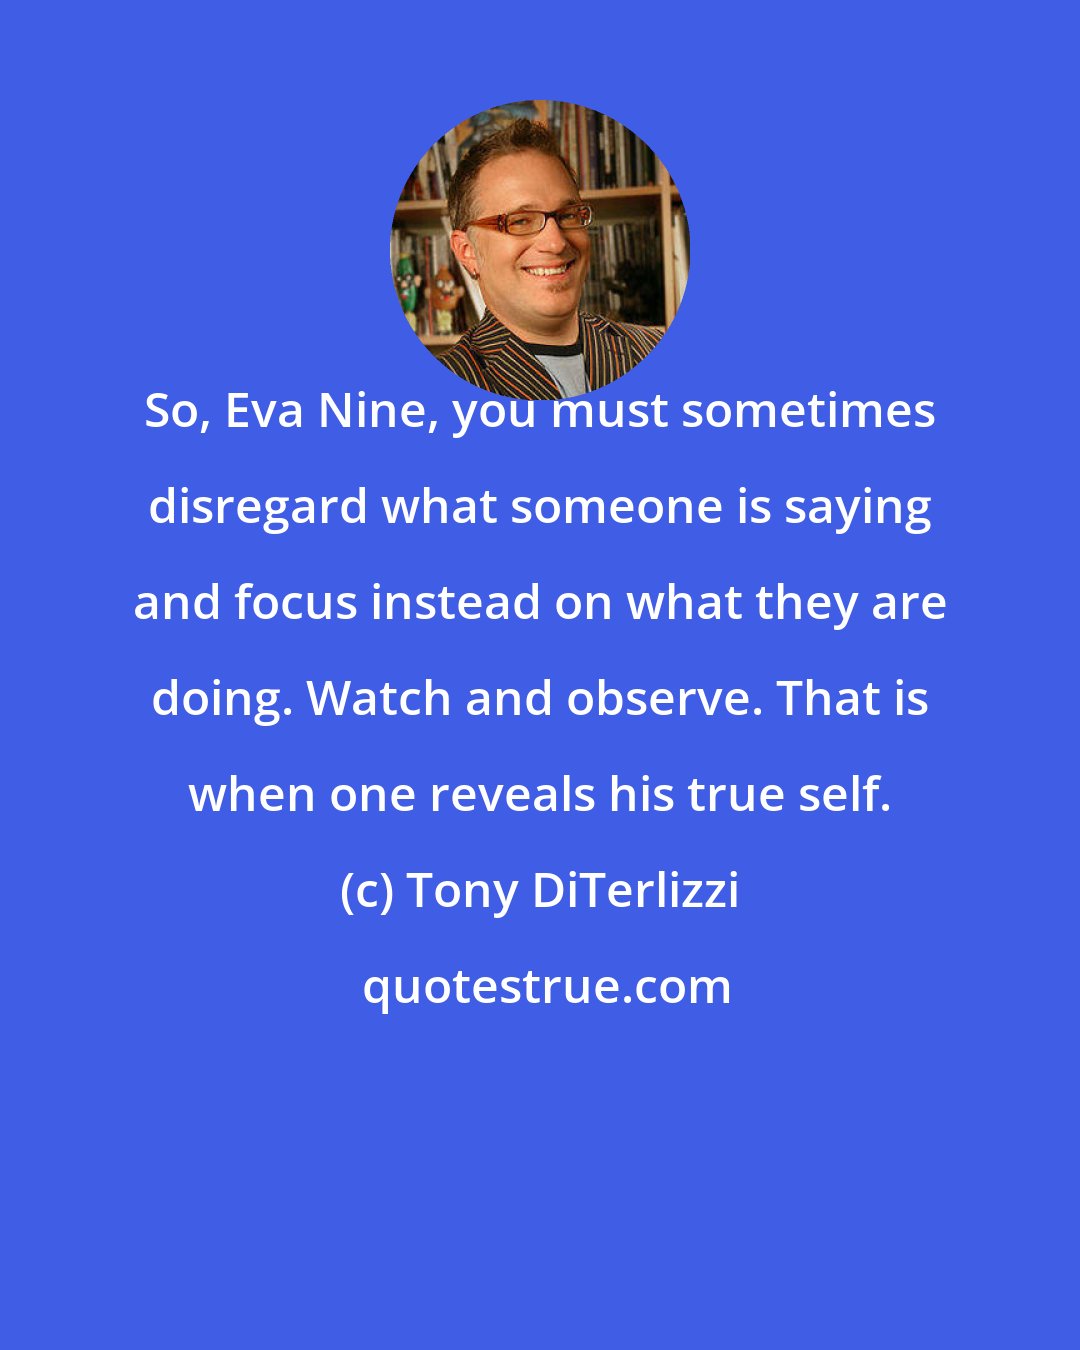 Tony DiTerlizzi: So, Eva Nine, you must sometimes disregard what someone is saying and focus instead on what they are doing. Watch and observe. That is when one reveals his true self.